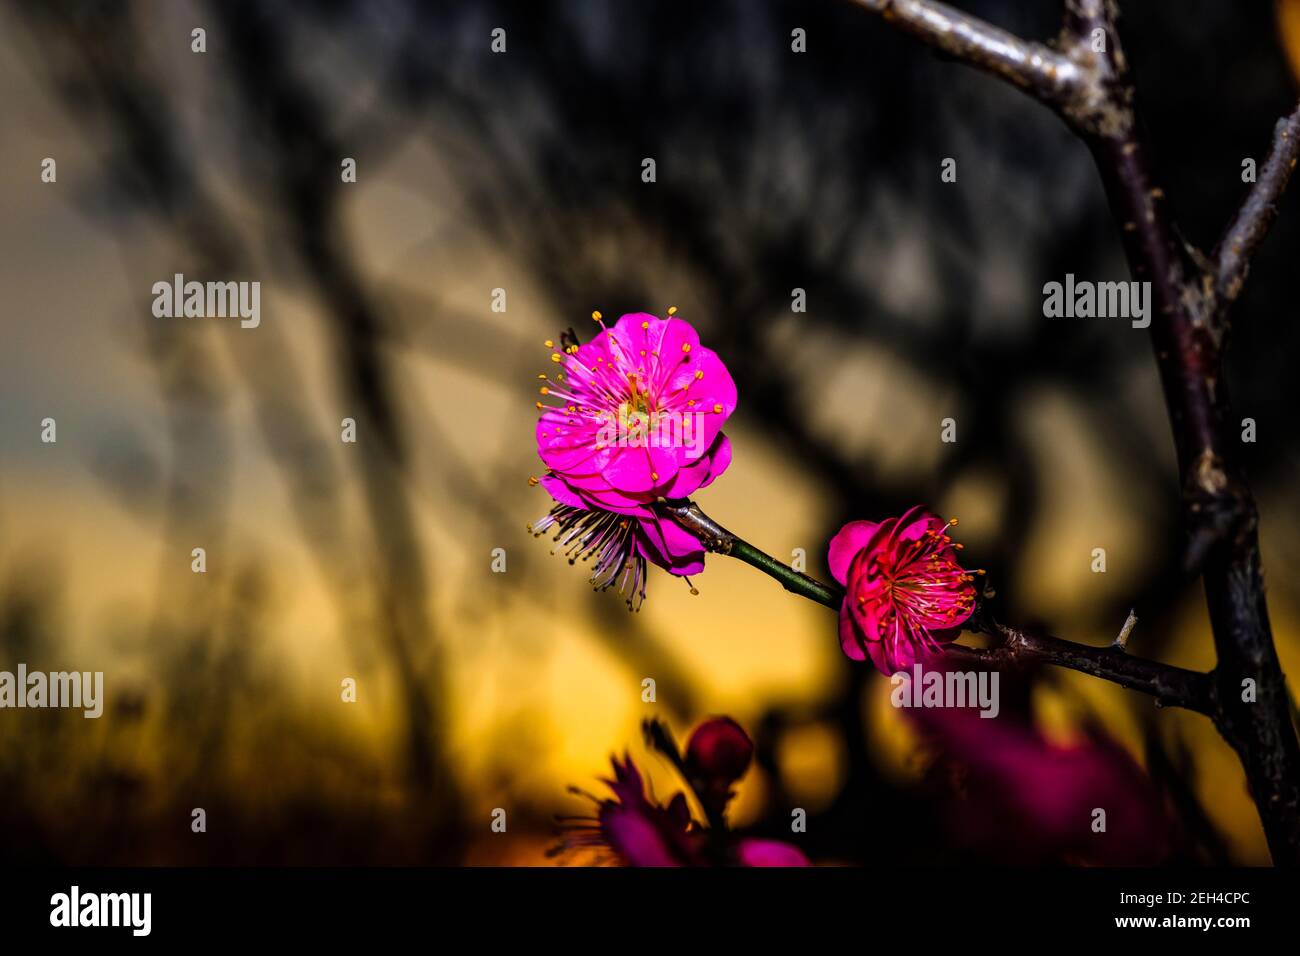 Plum blossoms at sunset Stock Photo